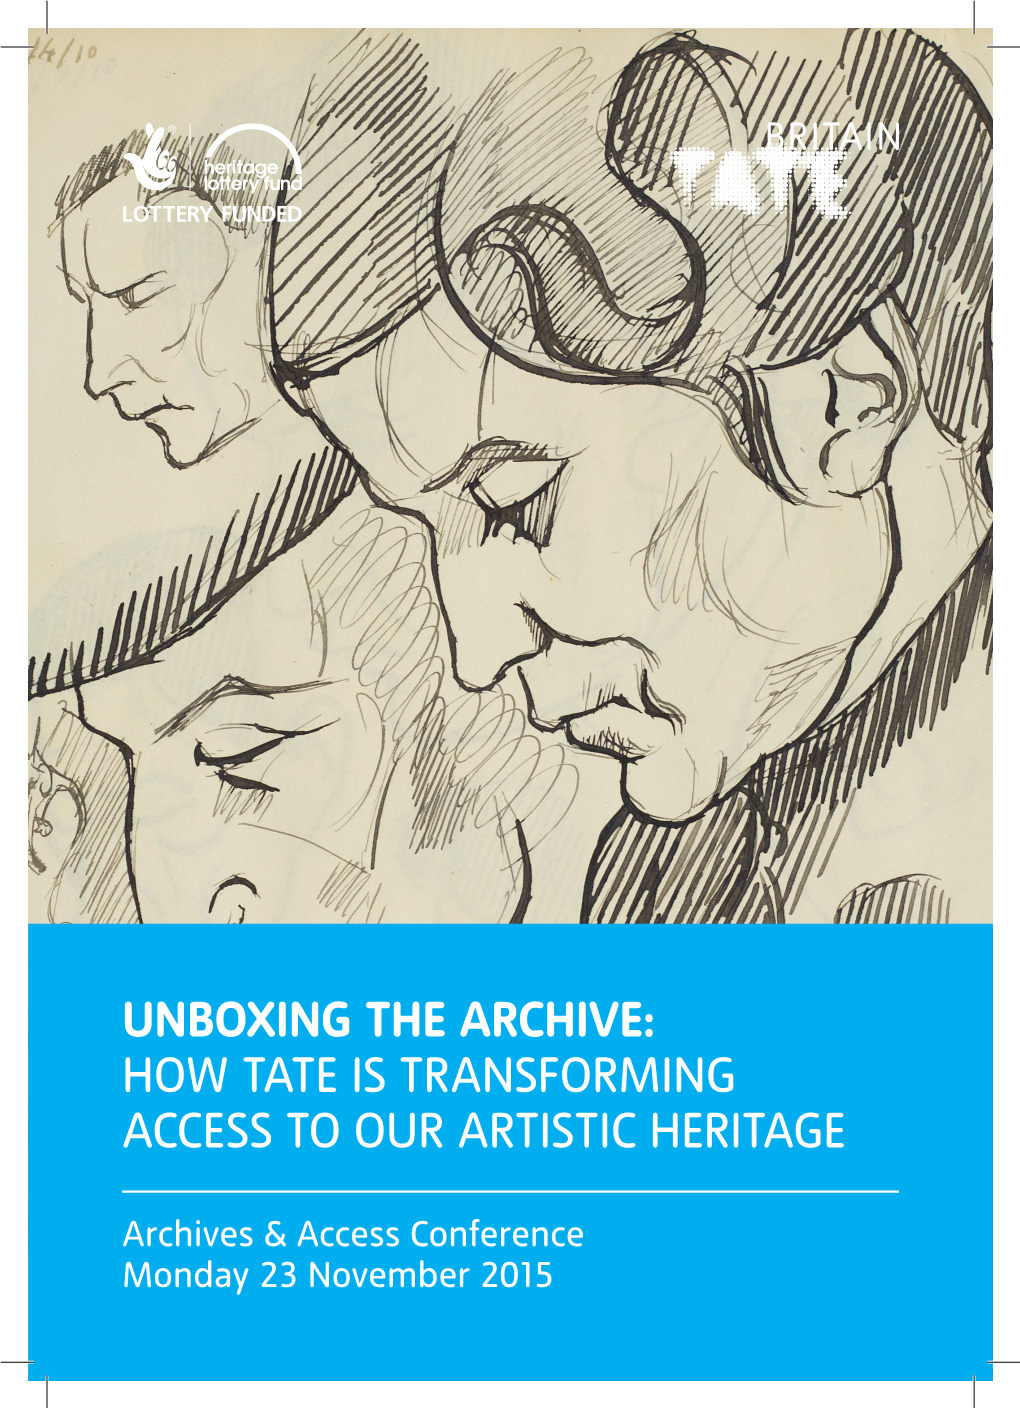 Unboxing the Archive: How Tate Is Transforming Access to Our Artistic Heritage